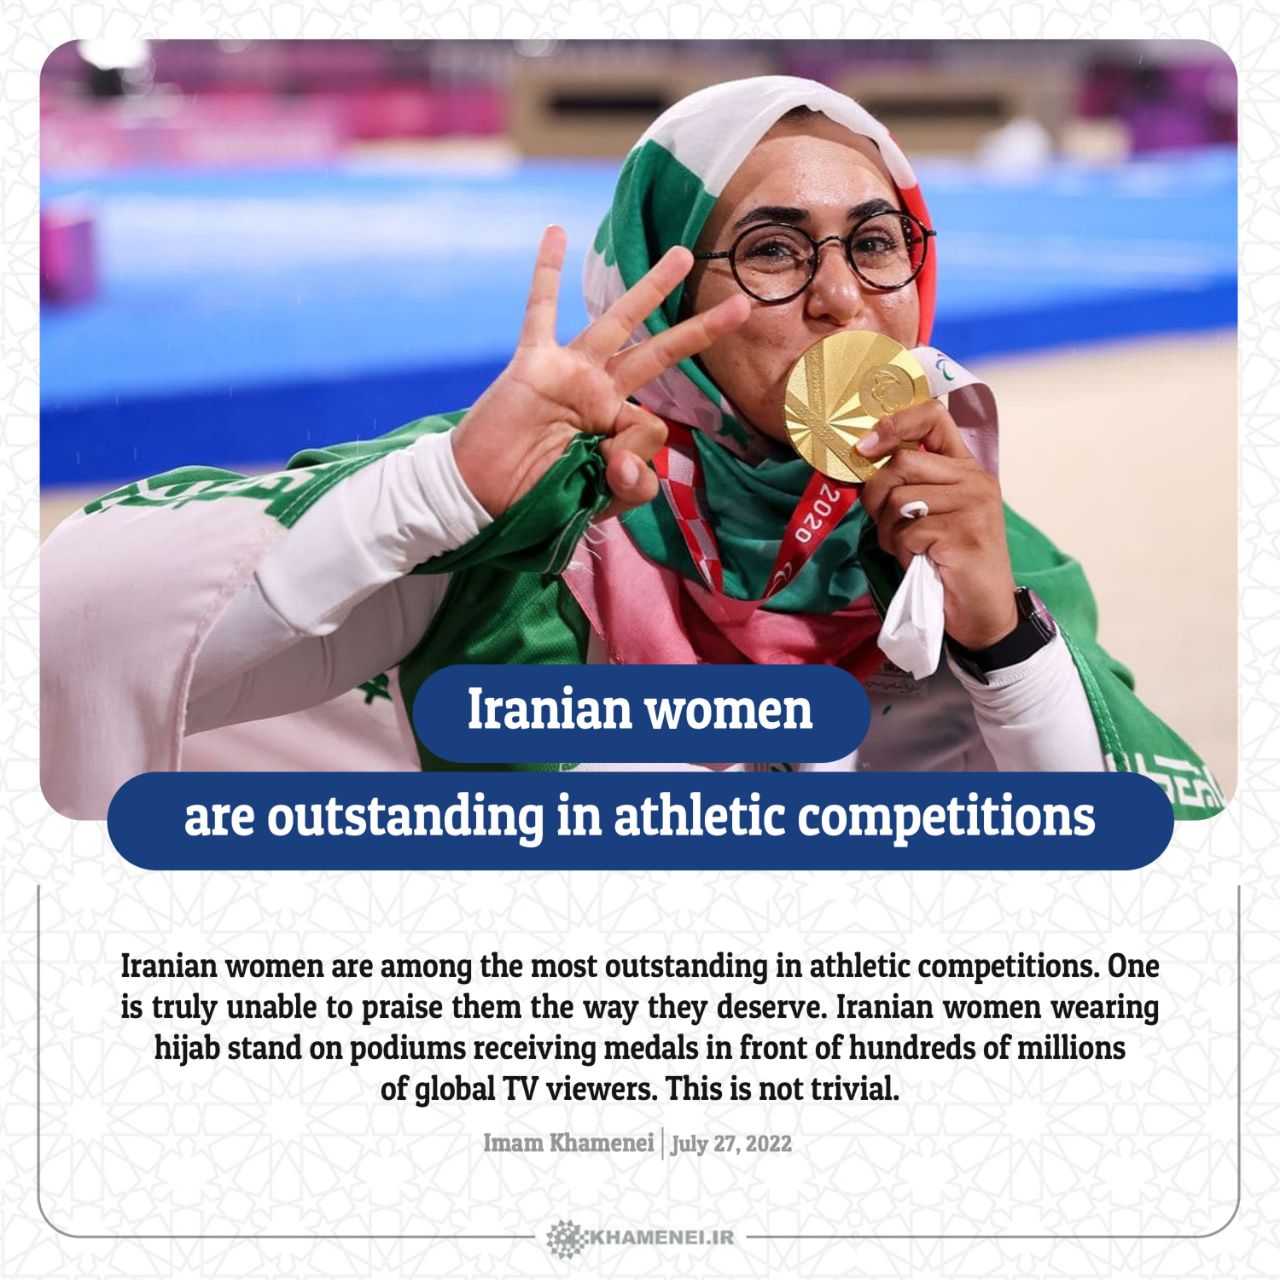 Iranian women are outstanding in athletic competitions